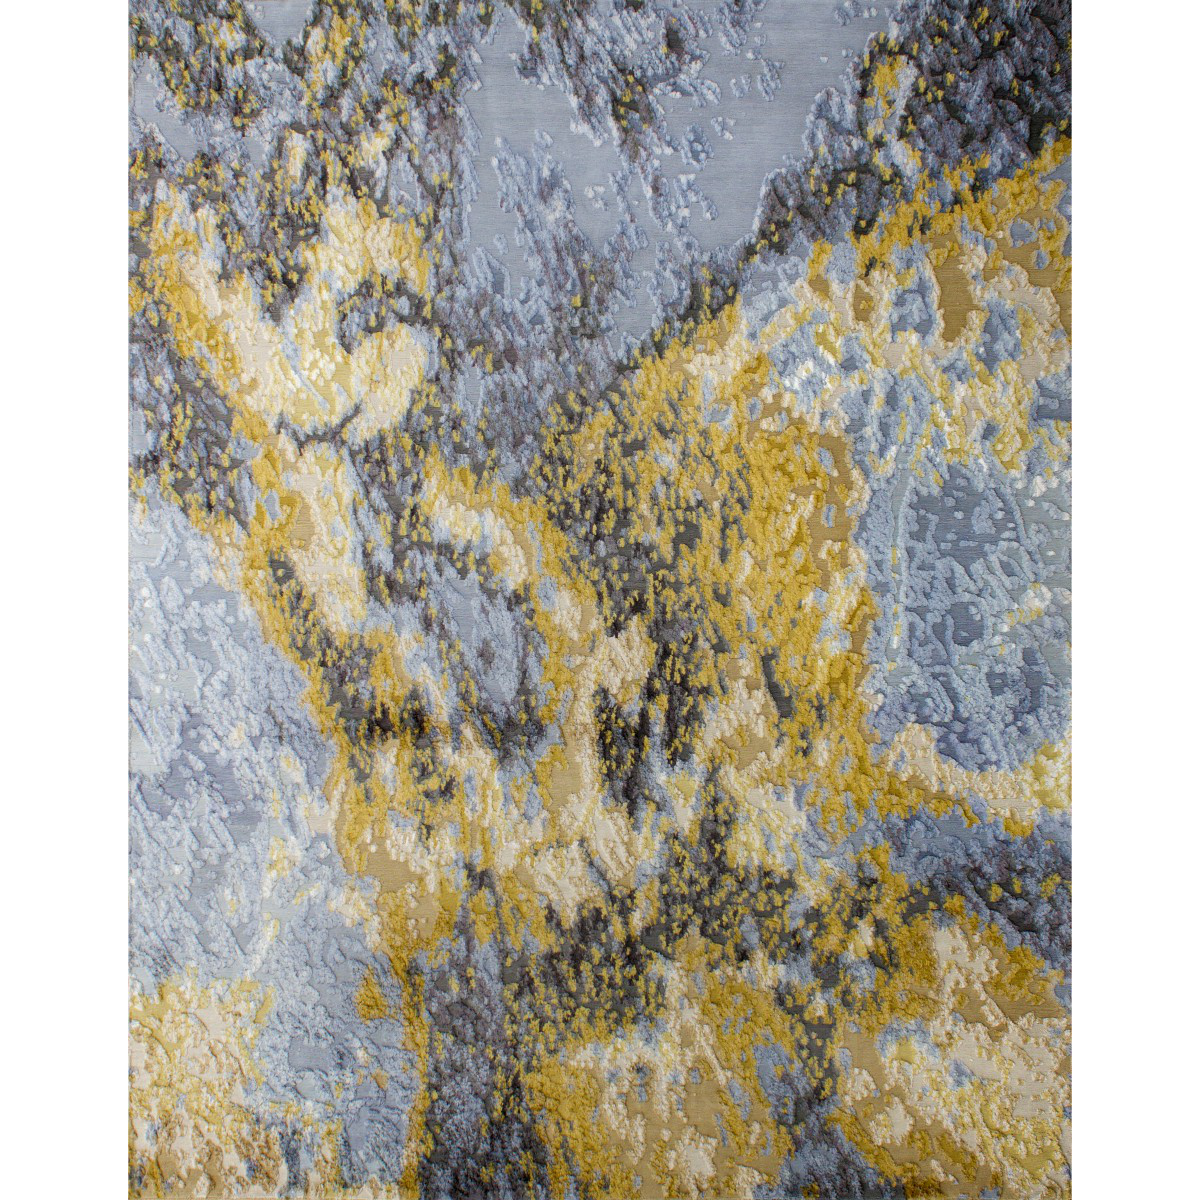  Reflections  Handknotted Rug by Karen Michelle Evans